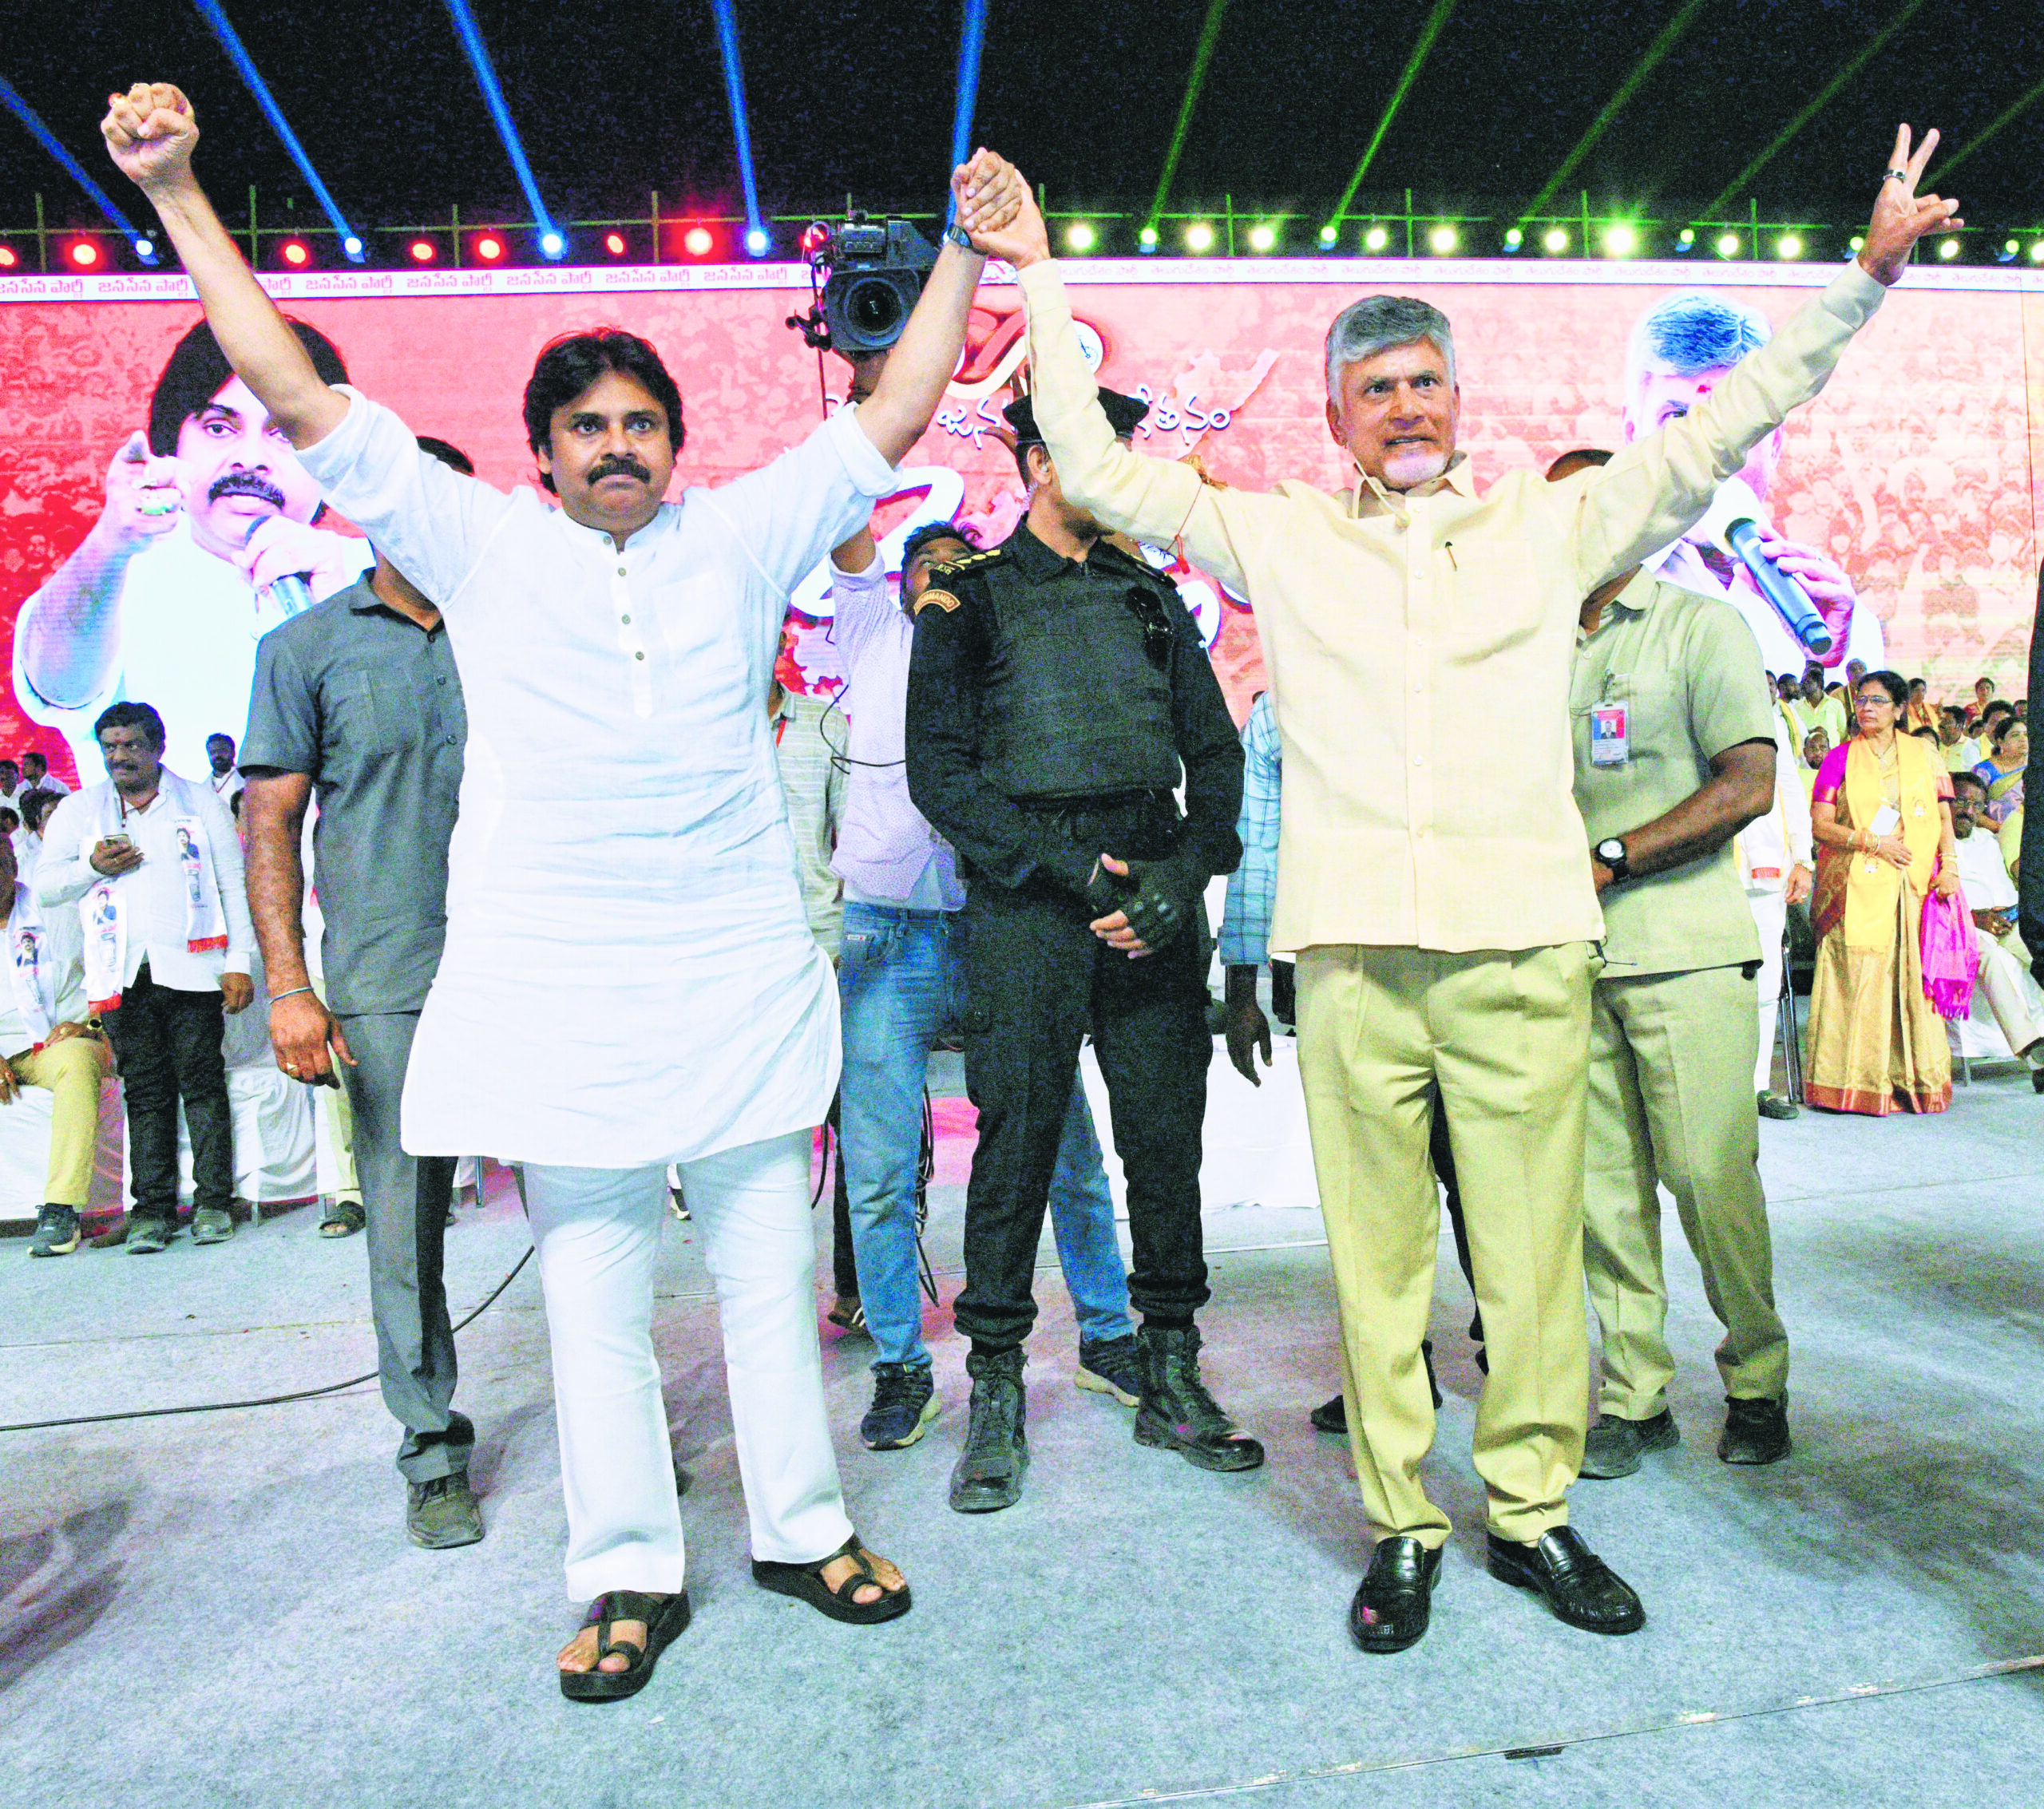 Historic alliance rally in Andhra Pradesh sets stage for political battle